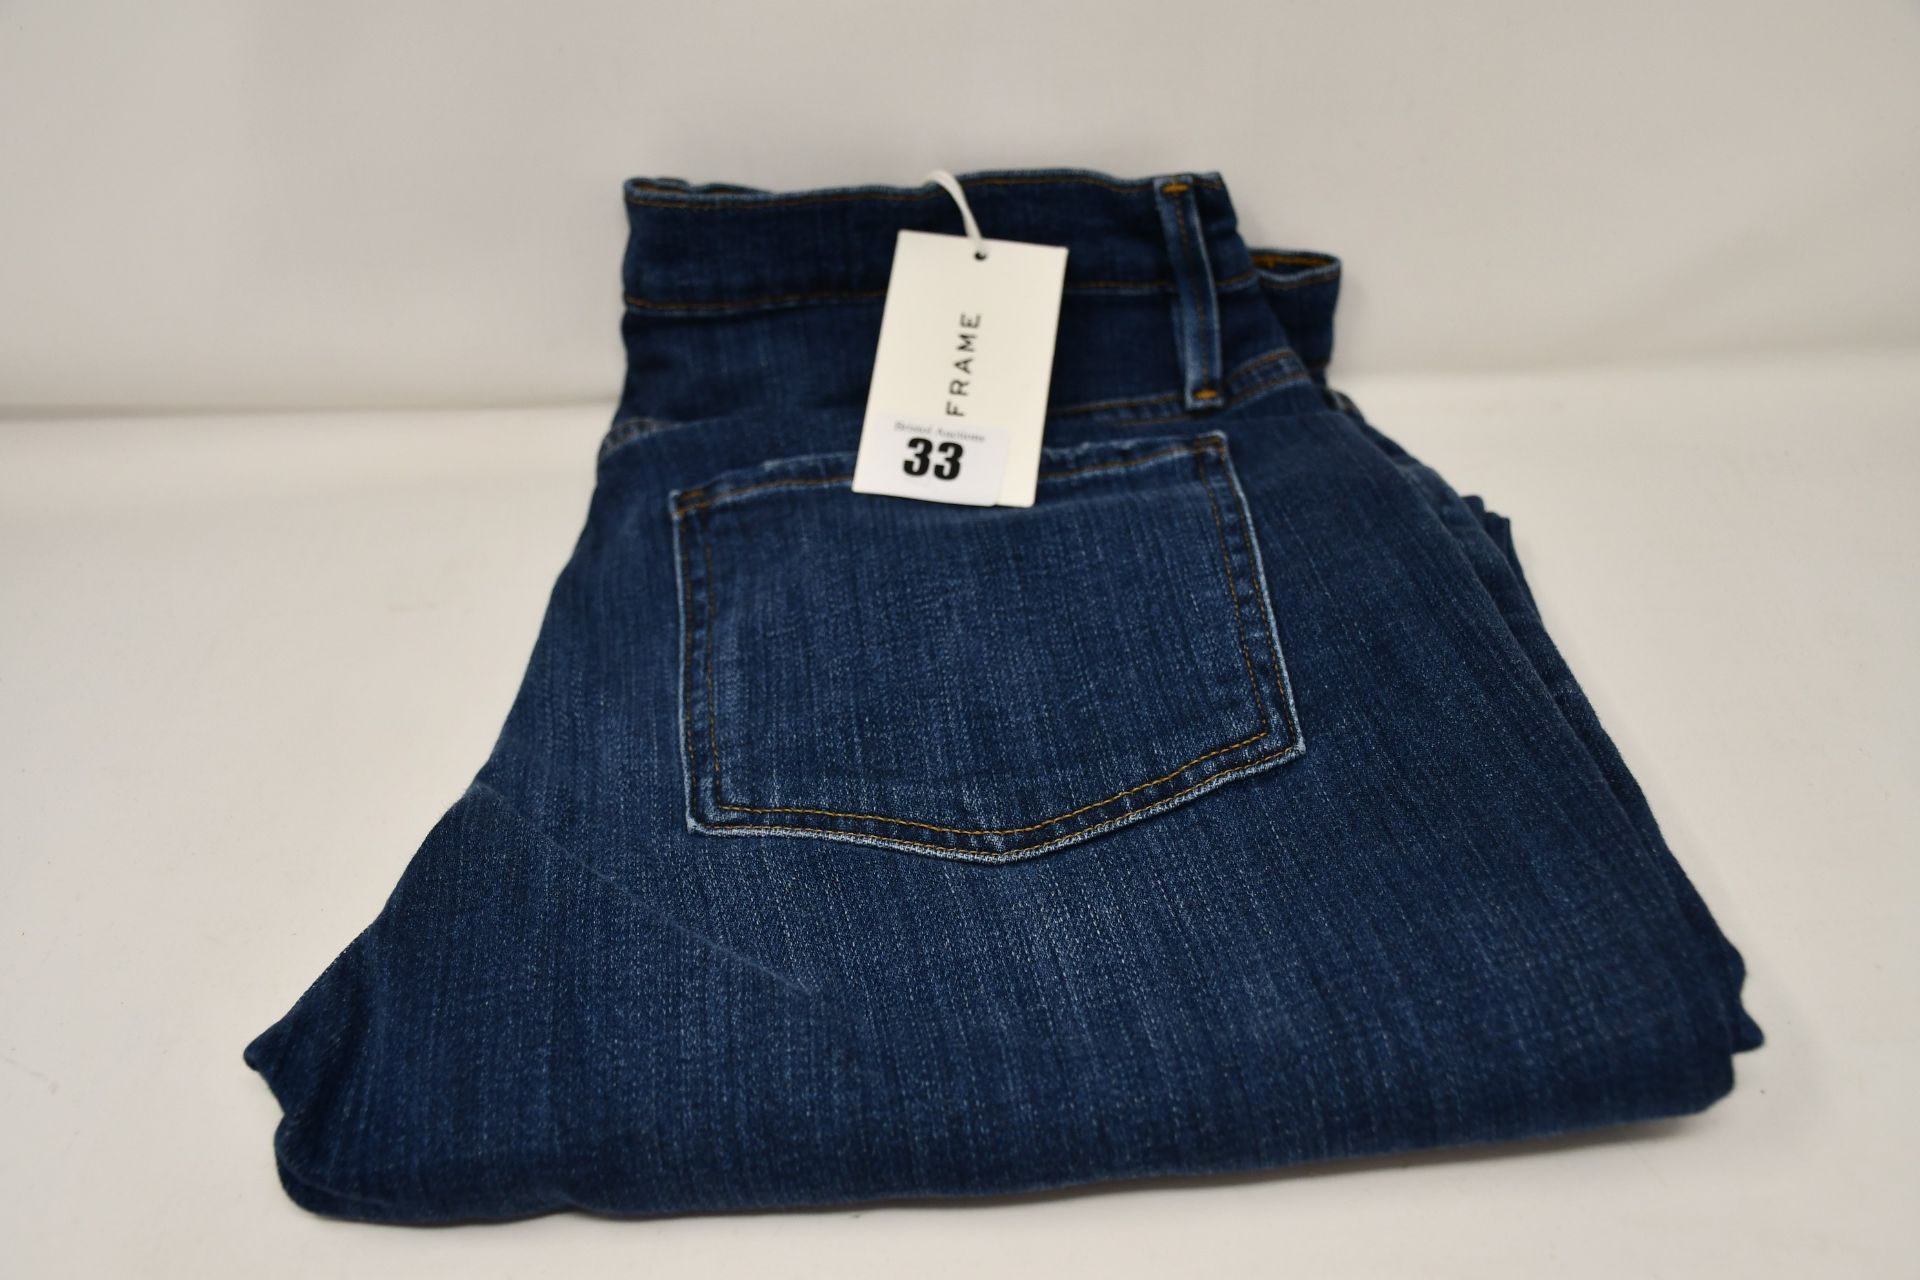 A pair of as new Frame Le Beau jeans in Burnside (Size 28).